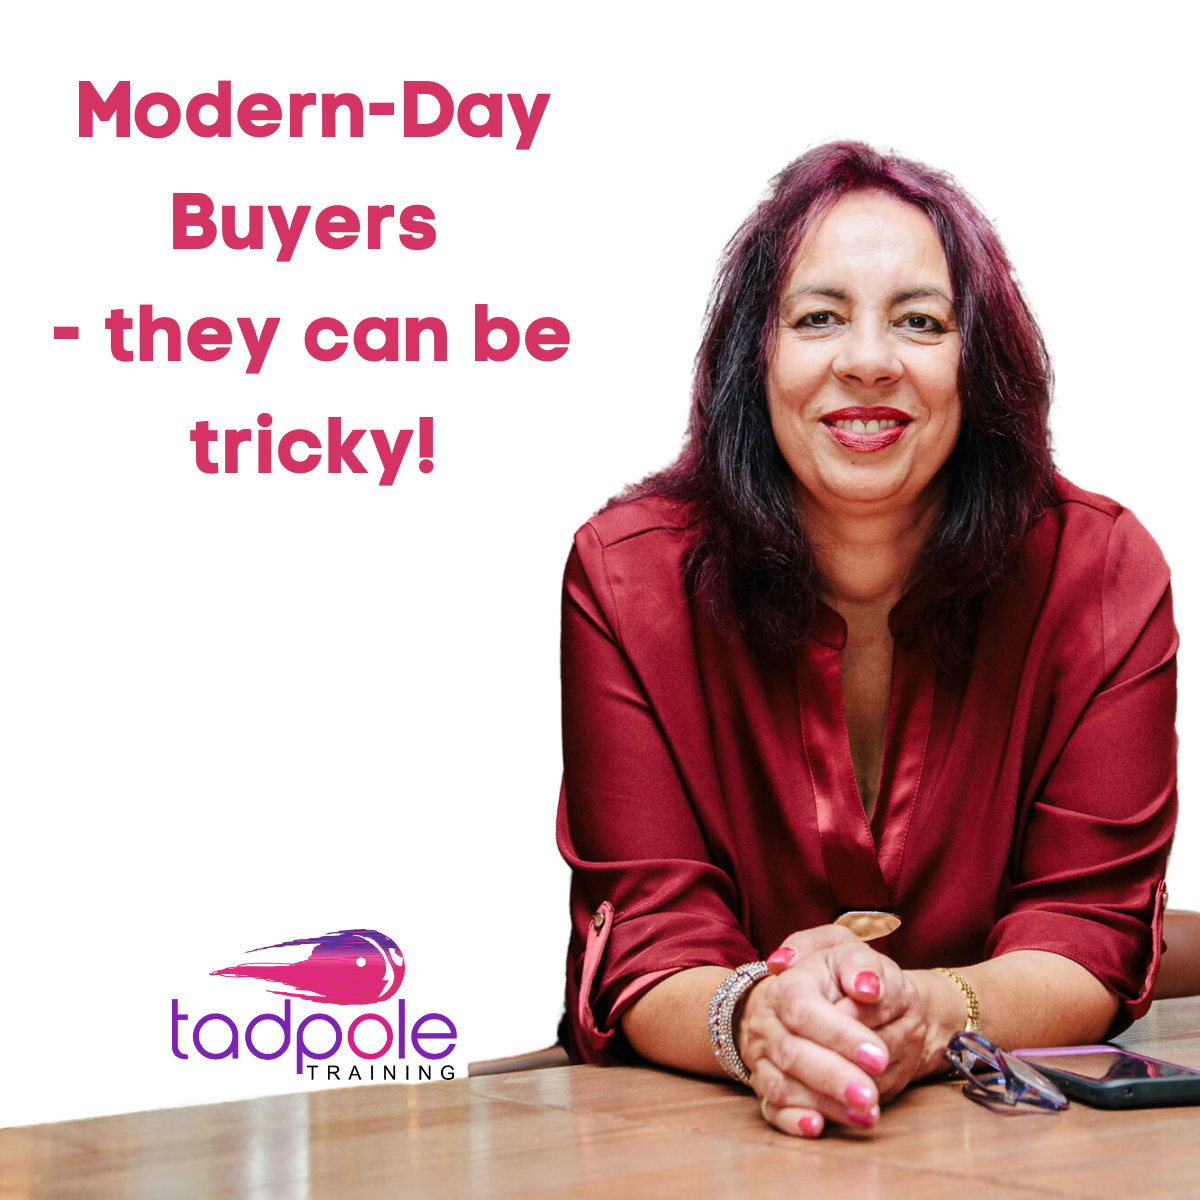 Modern-Day Buyers can be tricky!